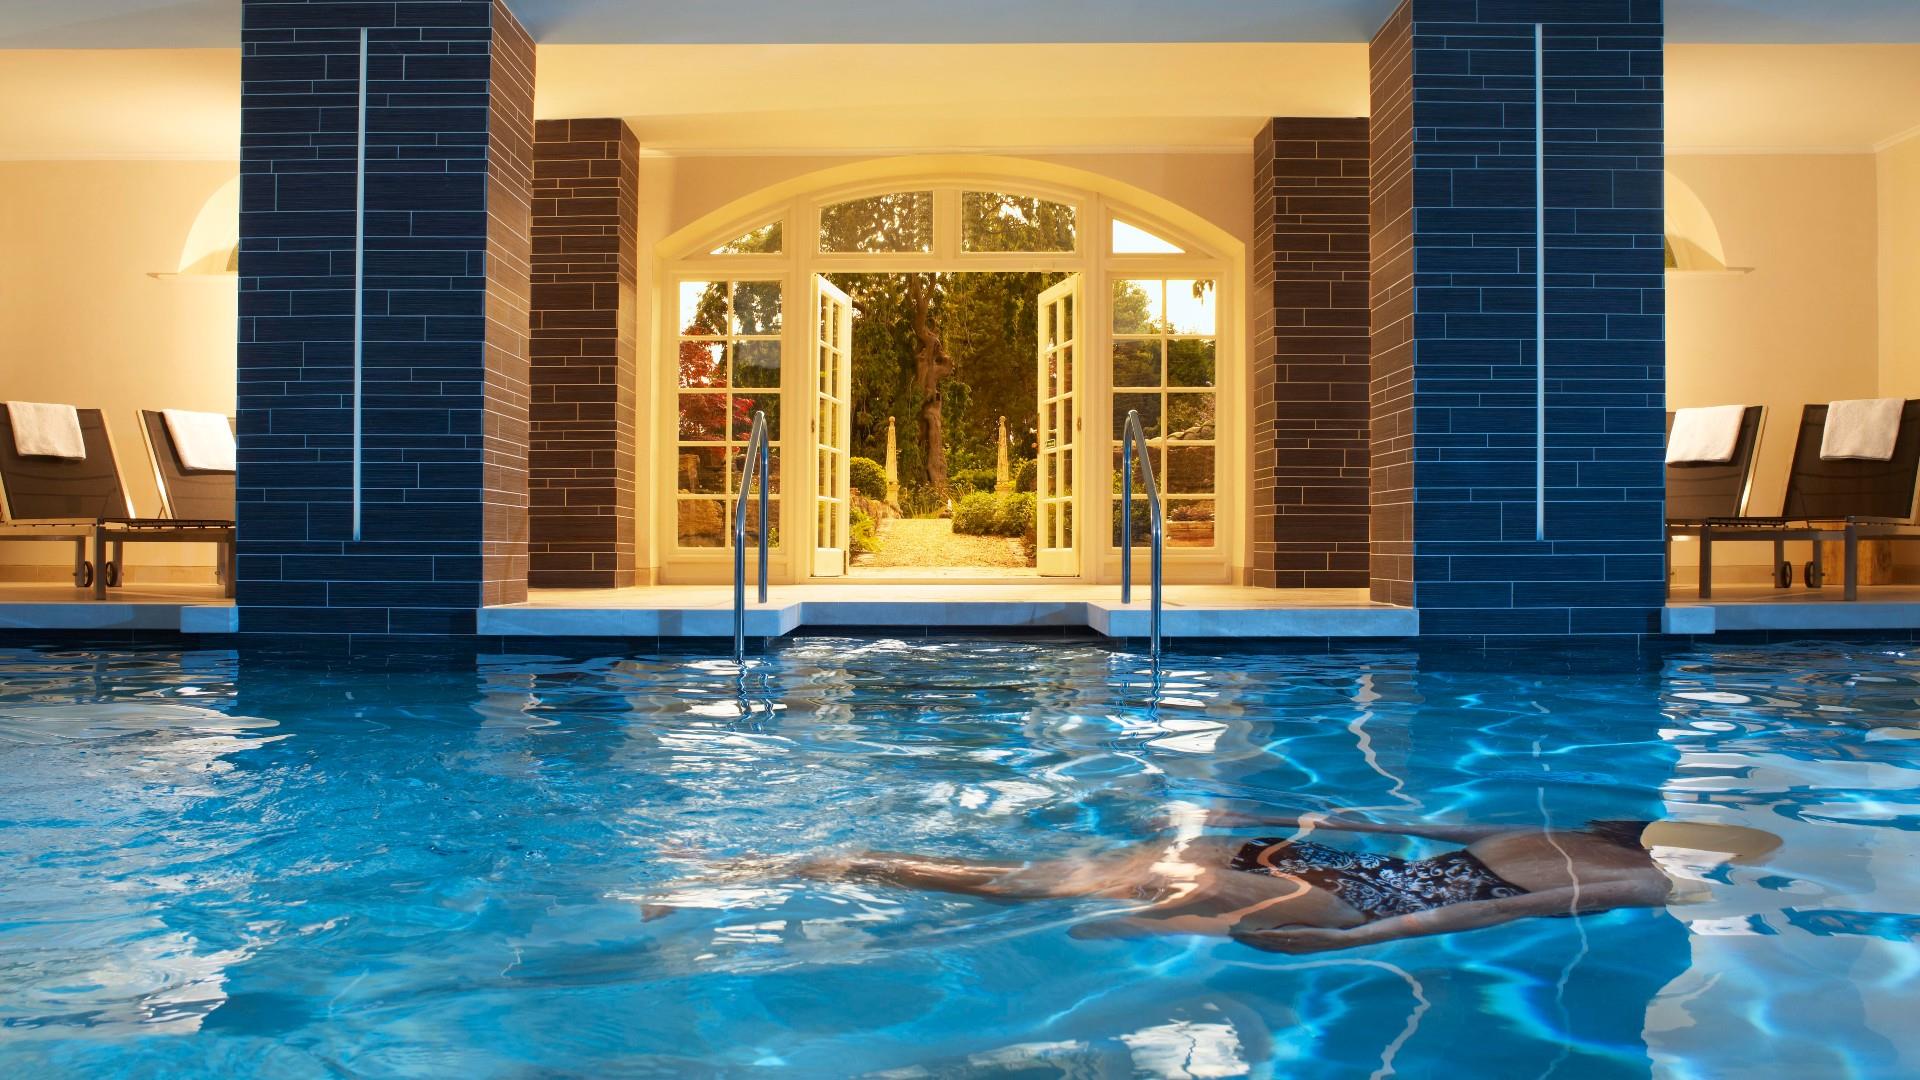 Places To Stay with Swimming Pools in Bath   Visit Bath